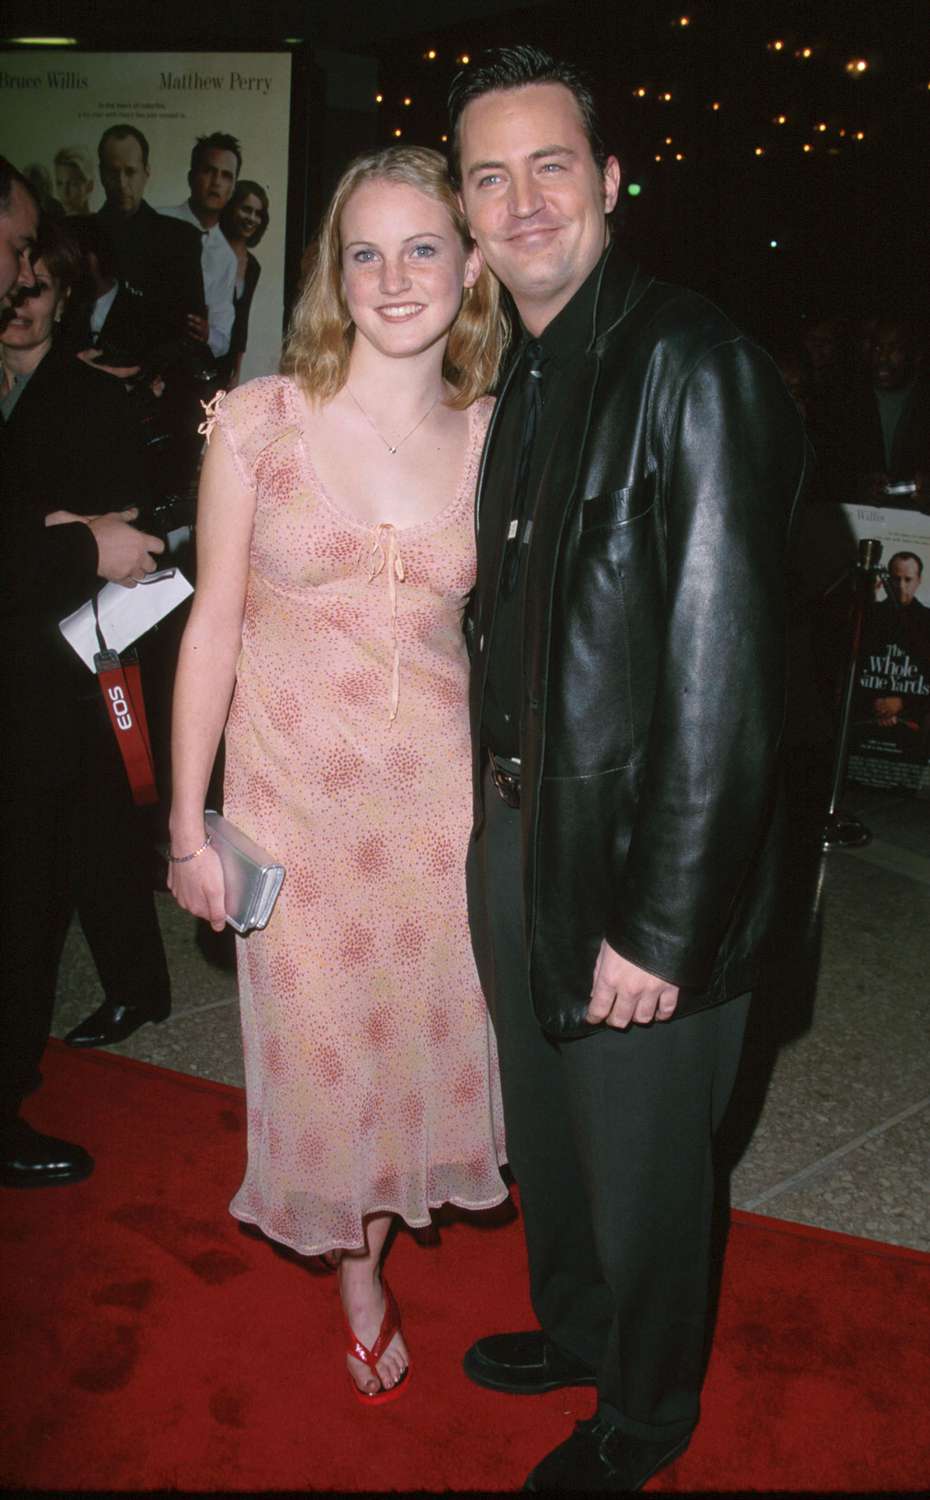 Matthew Perry and his sister Emily during "The Whole Nine Yards" Los Angeles Premiere at Cineplex Odeon Century Plaza Cinema in Century City, California, United States.